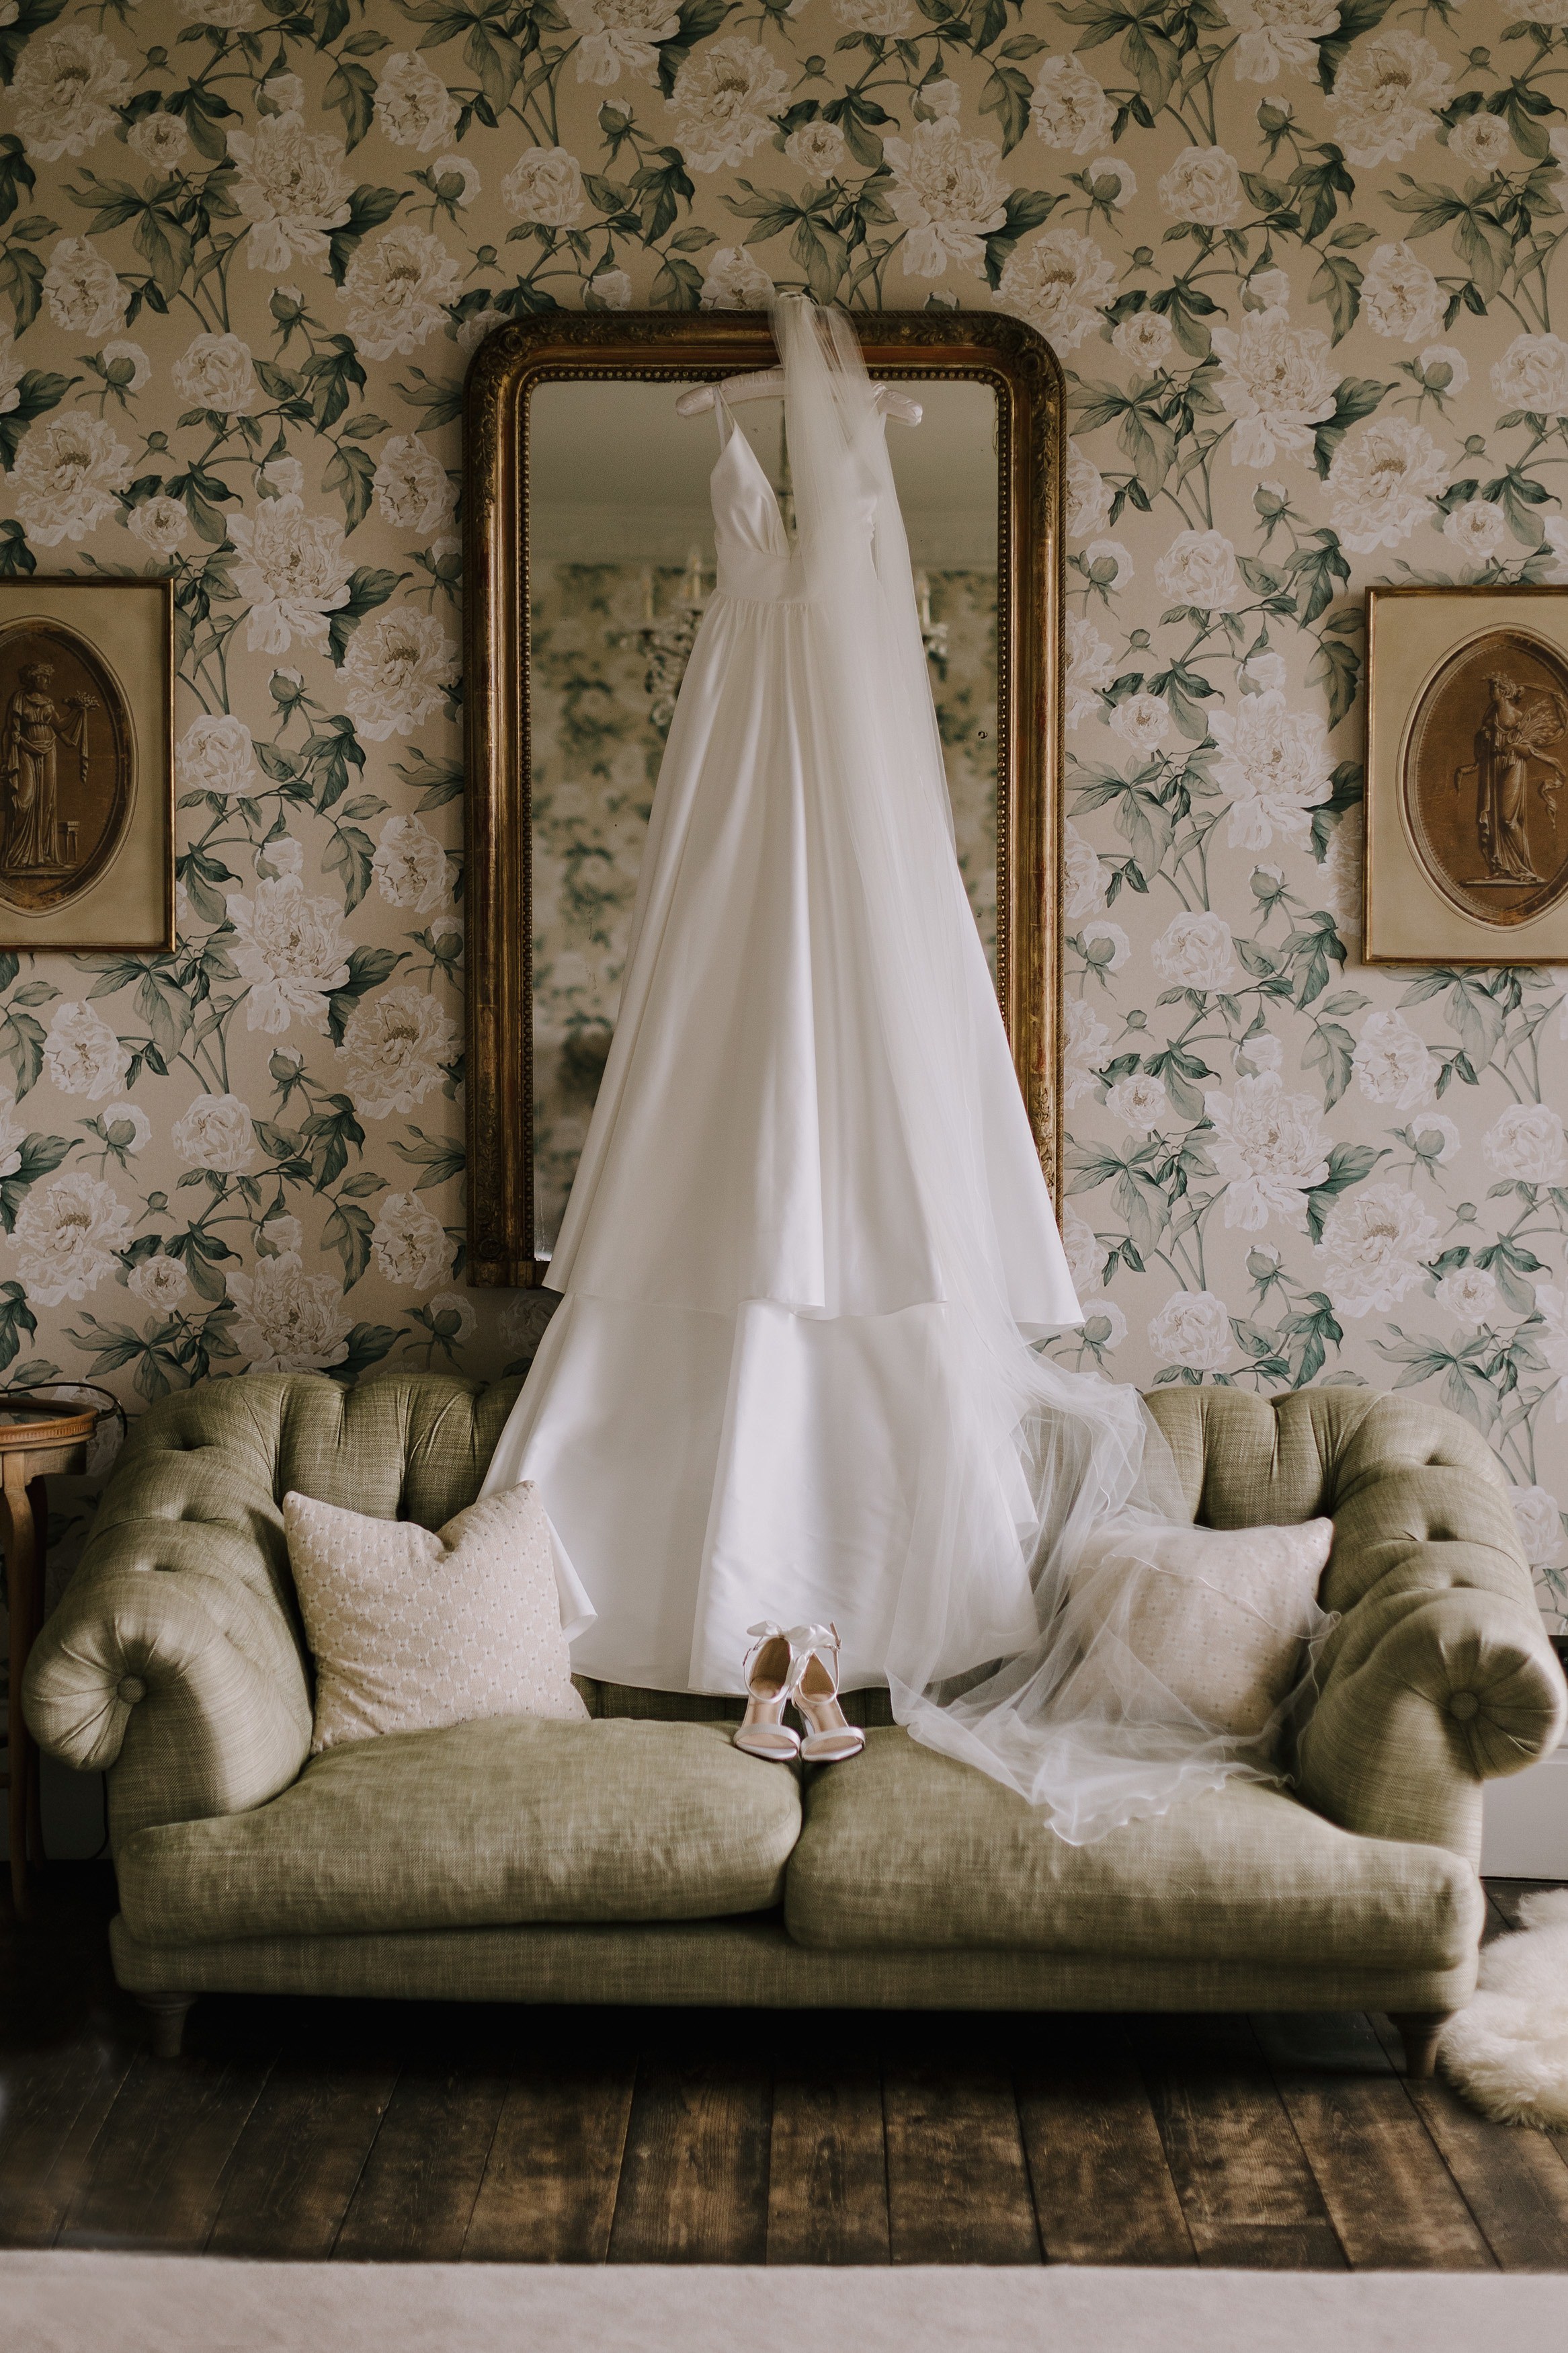 Wedding dress, veil and wedding shoes positioned over a sofa and mirror in a stately home